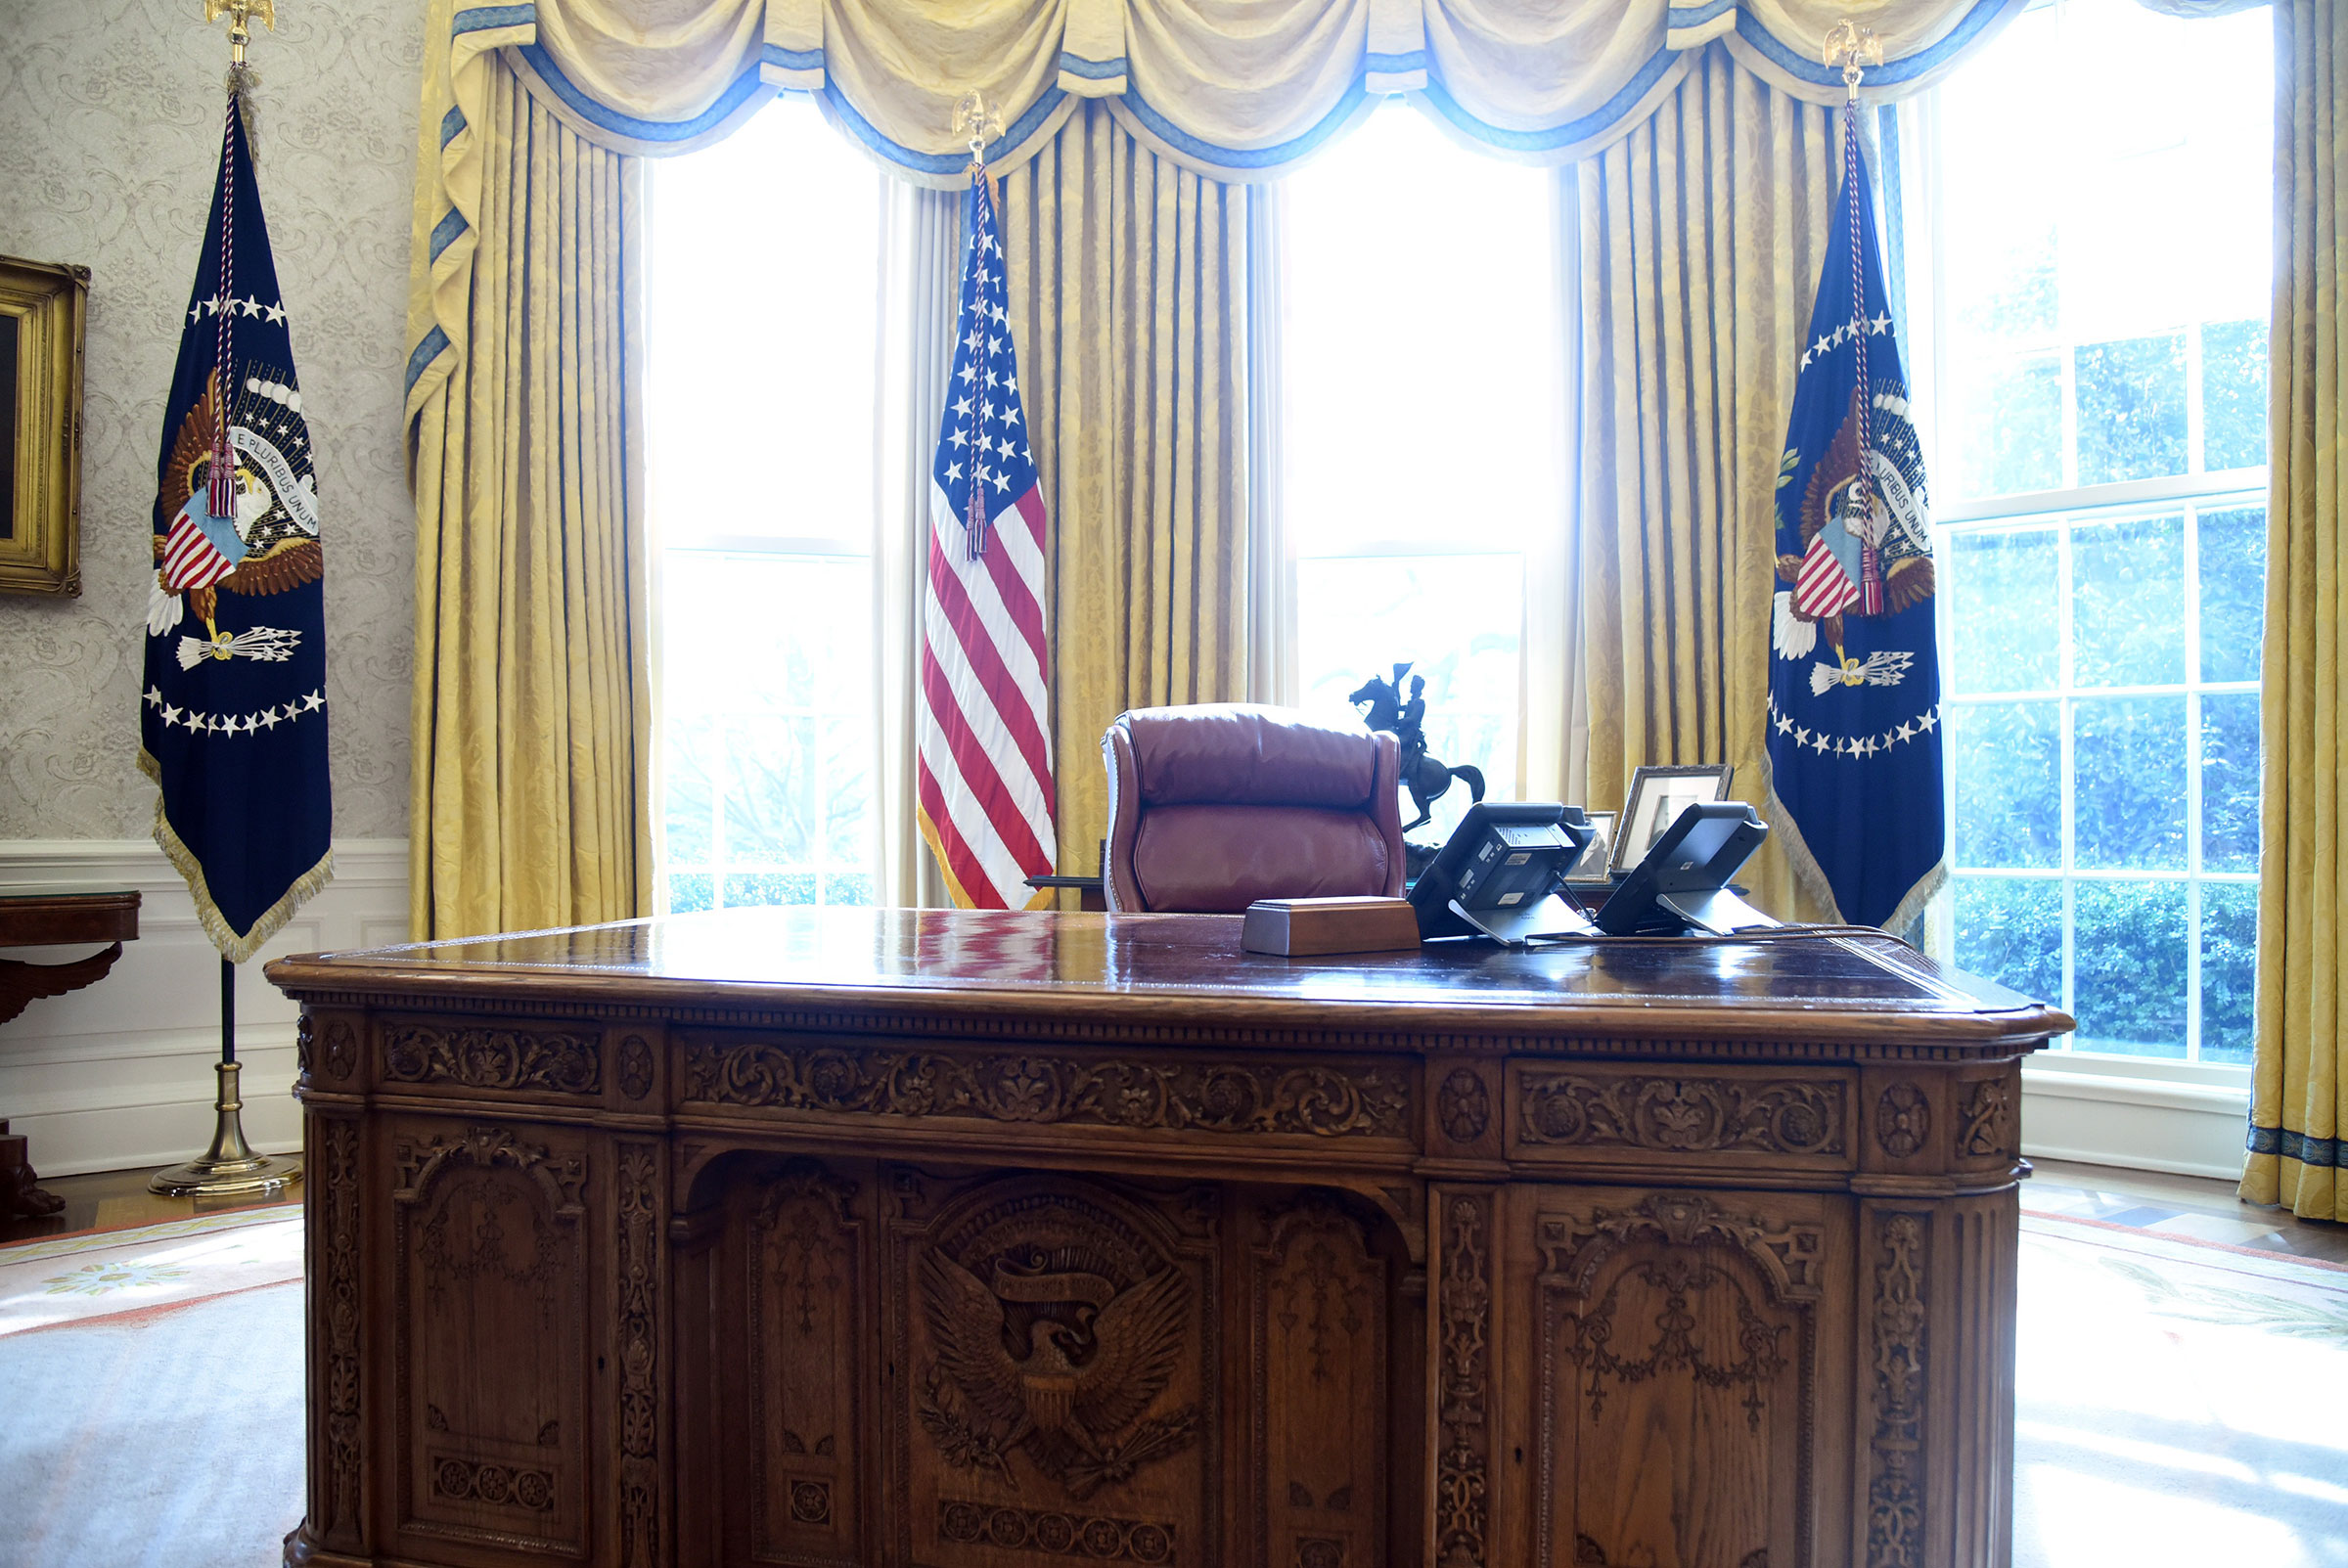 The Resolute desk is seen  in the Oval Office of the White House, Feb. 9, 2018. (Olivier Douliery—Getty Images)